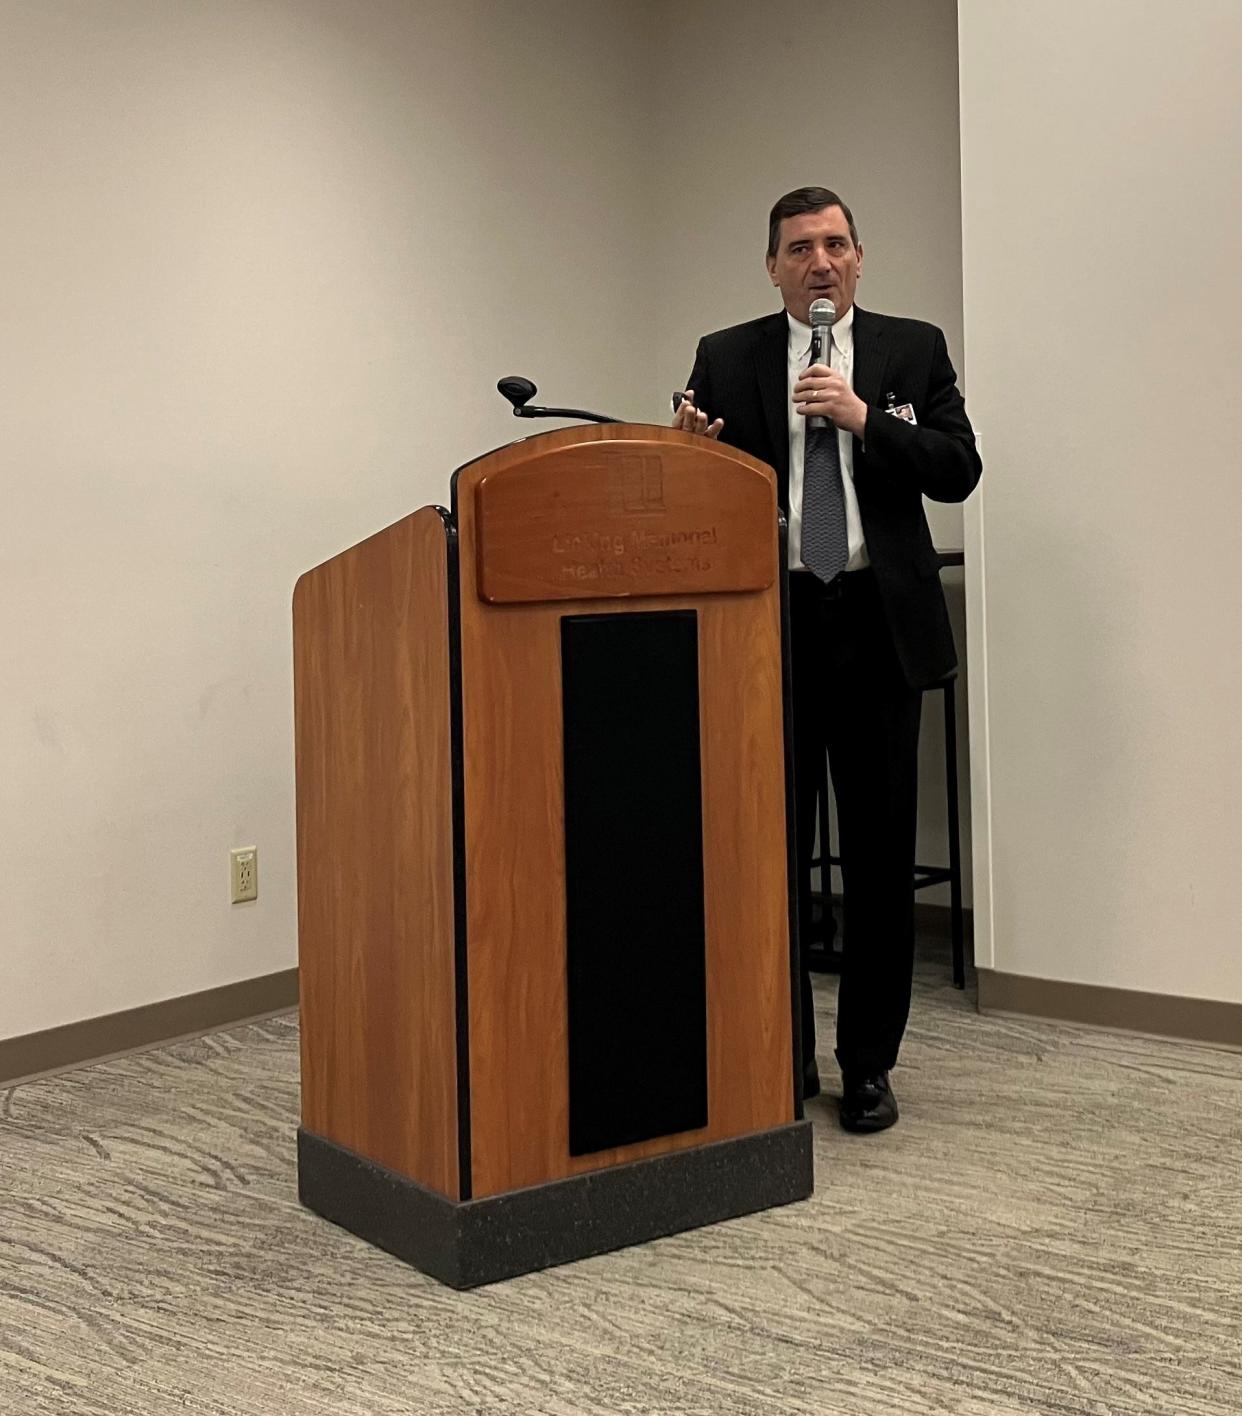 Rob Montagnese, president and CEO of Licking Memorial Health Systems, provides a recap of 2022 and a look ahead to 2023 at Tuesday's quarterly breakfast at Licking Memorial Hospital.